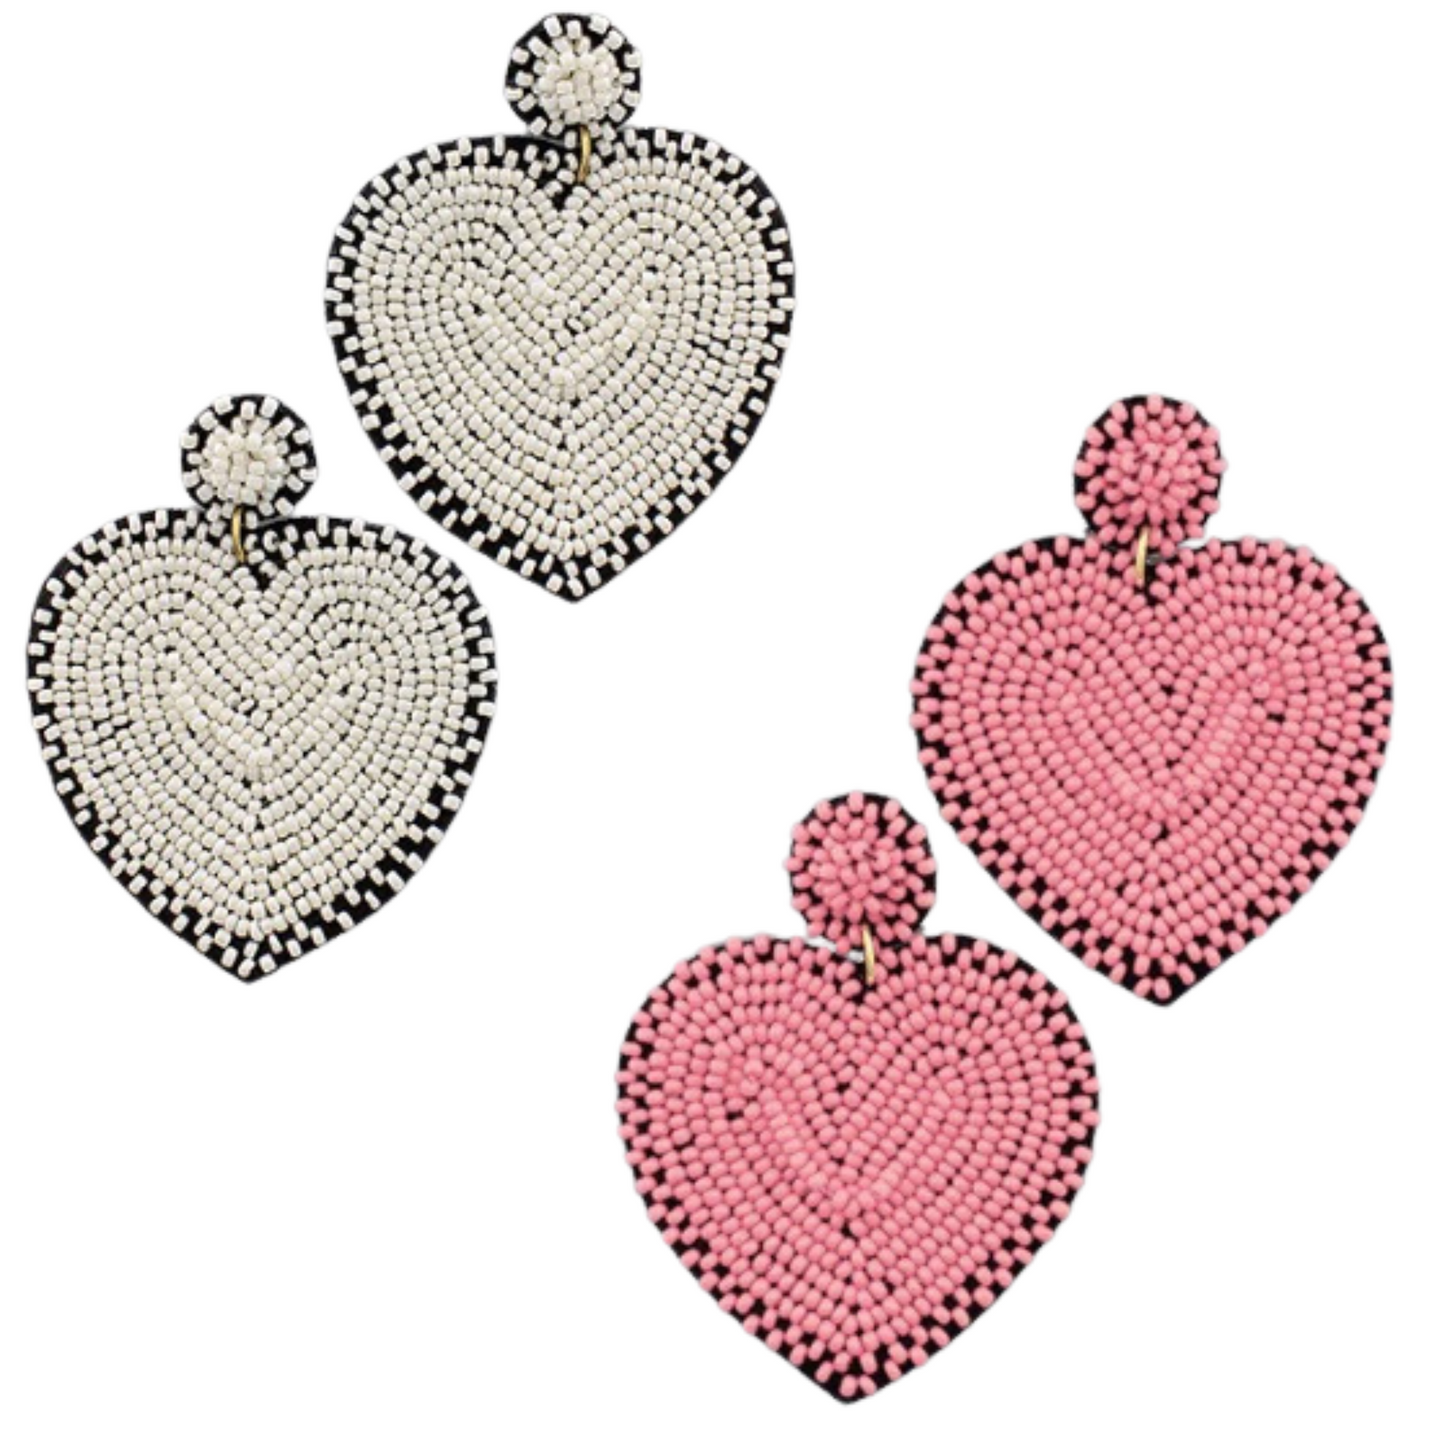 Crafted with delicate beads, these heart-shaped earrings come in two stunning colors: pink and white. The dangle design adds a touch of elegance to any outfit, making you stand out with a unique and stylish accessory. Perfect for any occasion, these earrings are a must-have for any jewelry collection.